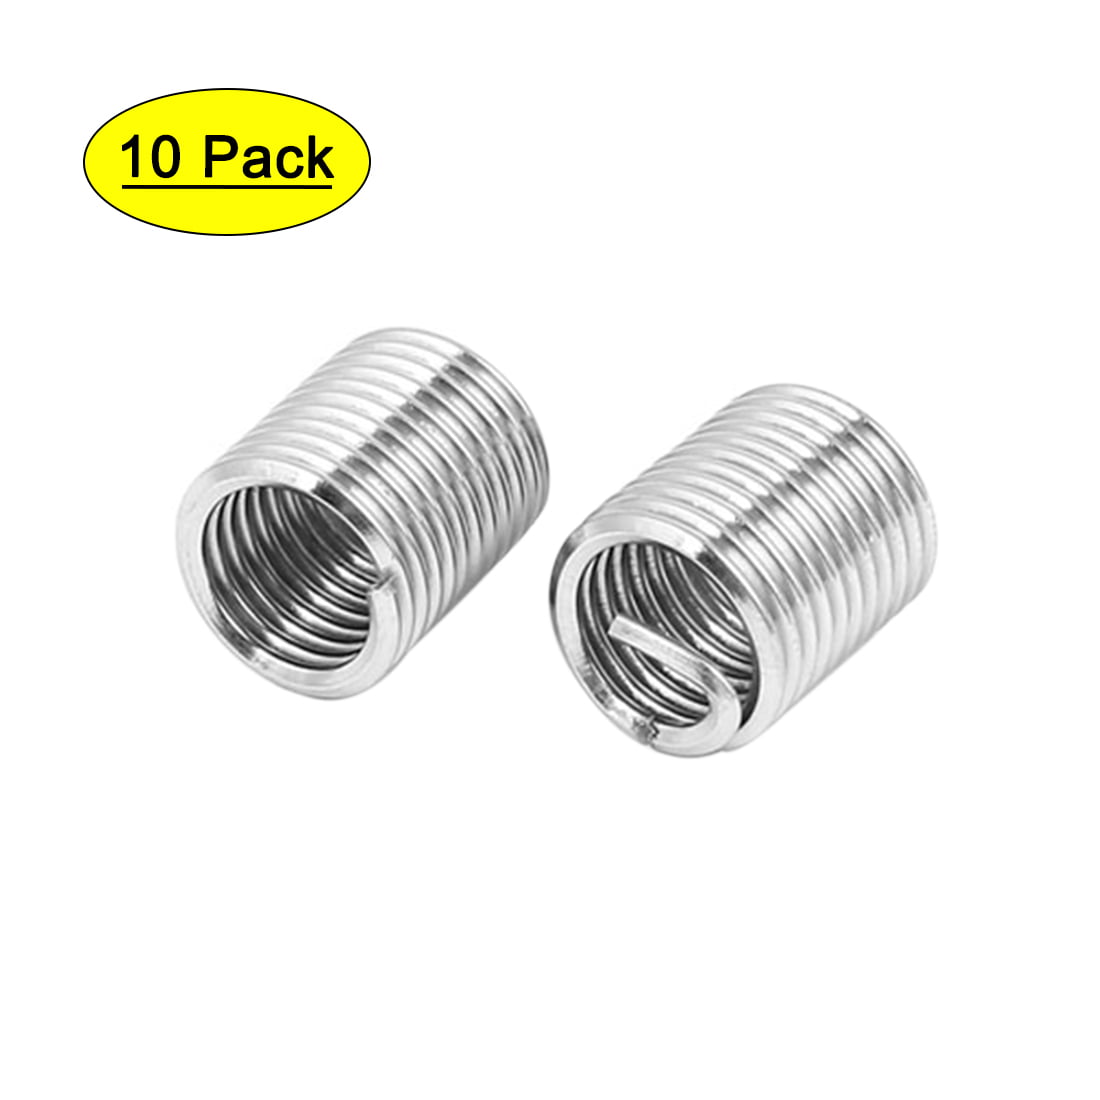 Details about   10x Stainless Steel Thread Inserts Reducing Nut Repair Tool Male Thread M6x1.0mm 